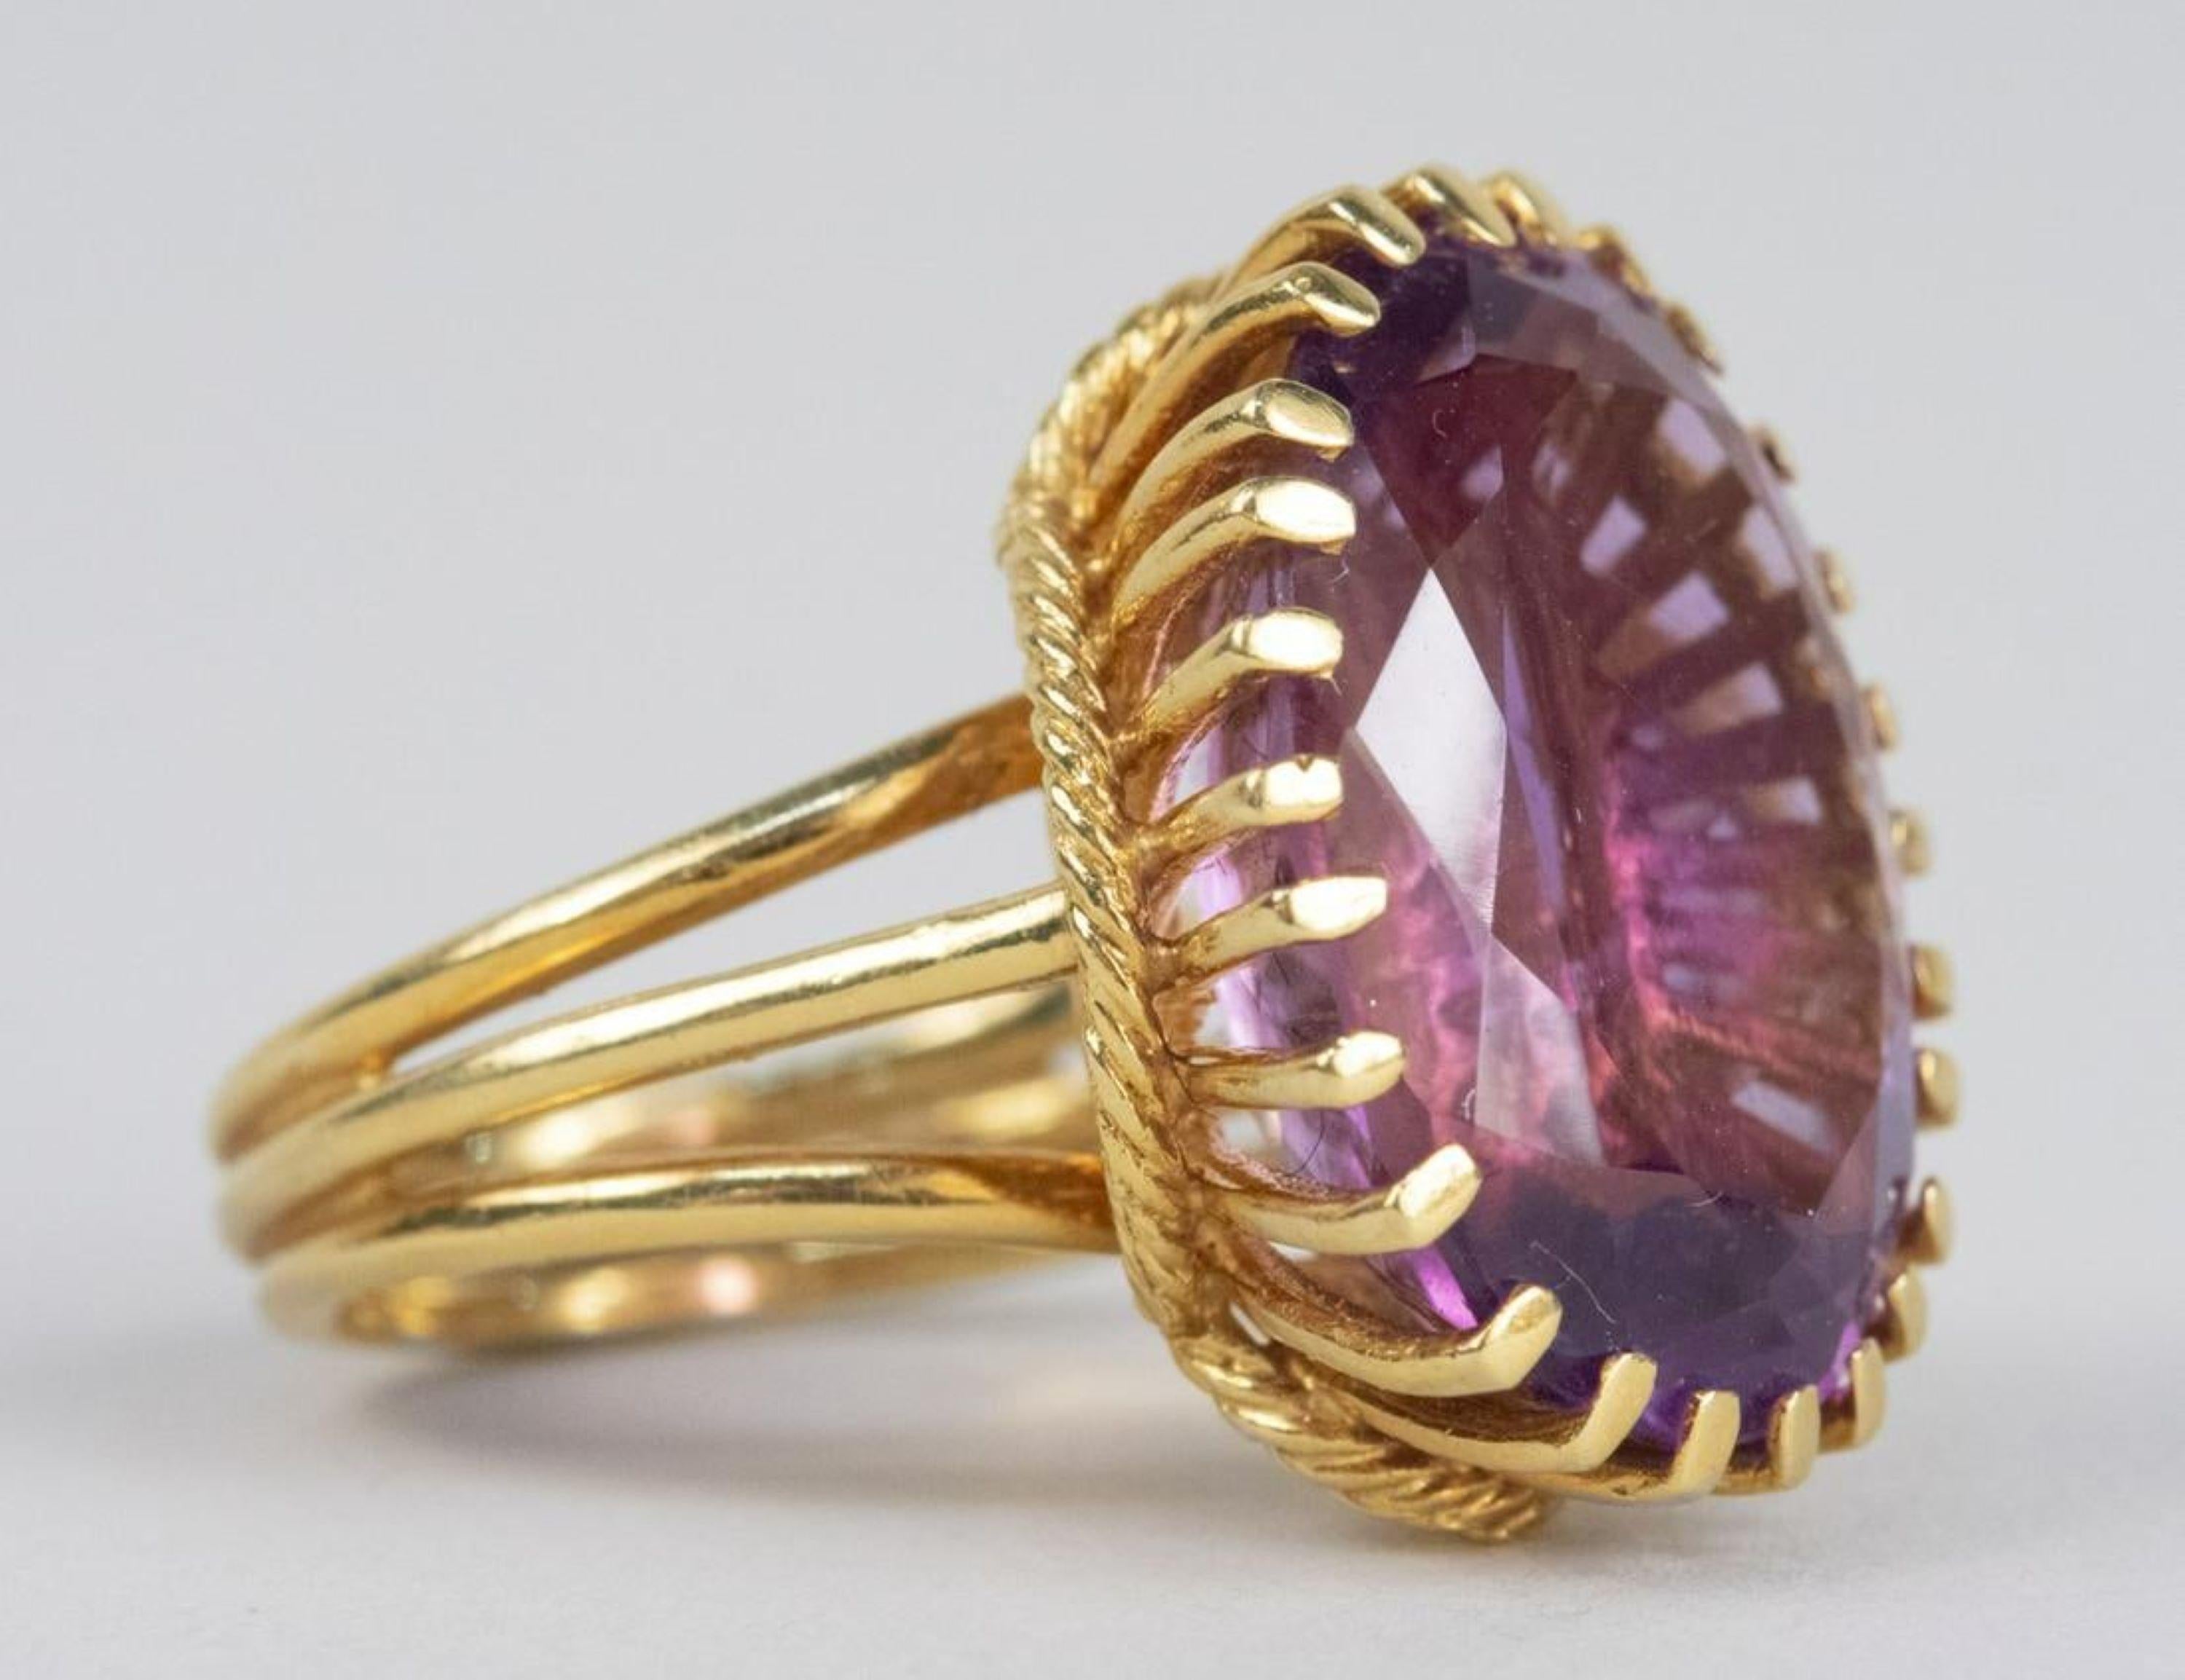 18K yellow gold ring set with an oval faceted amethyst, measuring 17.0 x 13.0 mm. Size 6 1/4. 3.4 grams.